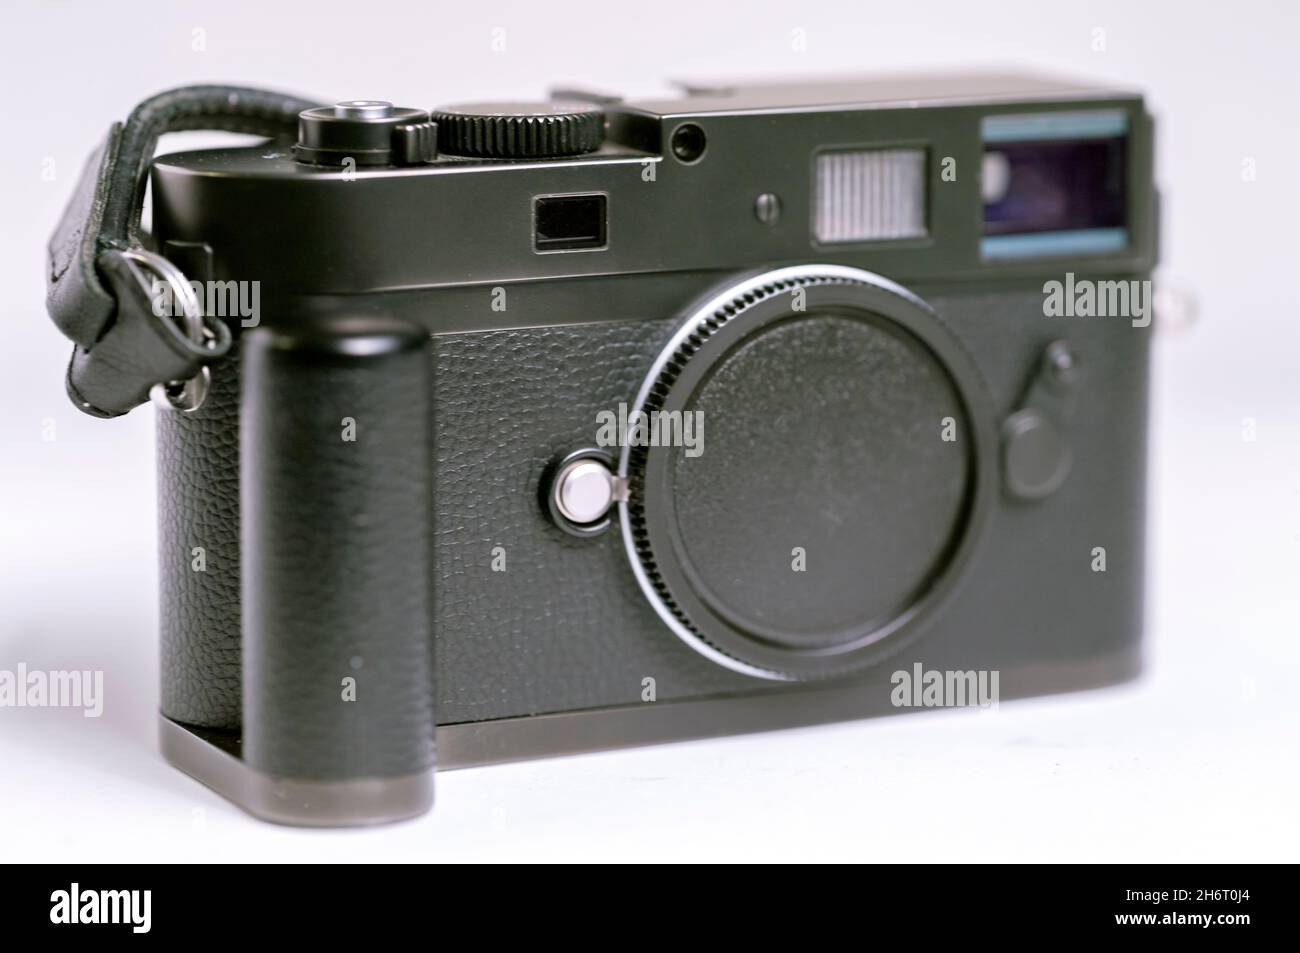 Leica Monochrome camera body. Leica Monochrome is a Black and White camera only. This is a very high quality black and white only camera at 18MP. Stock Photo